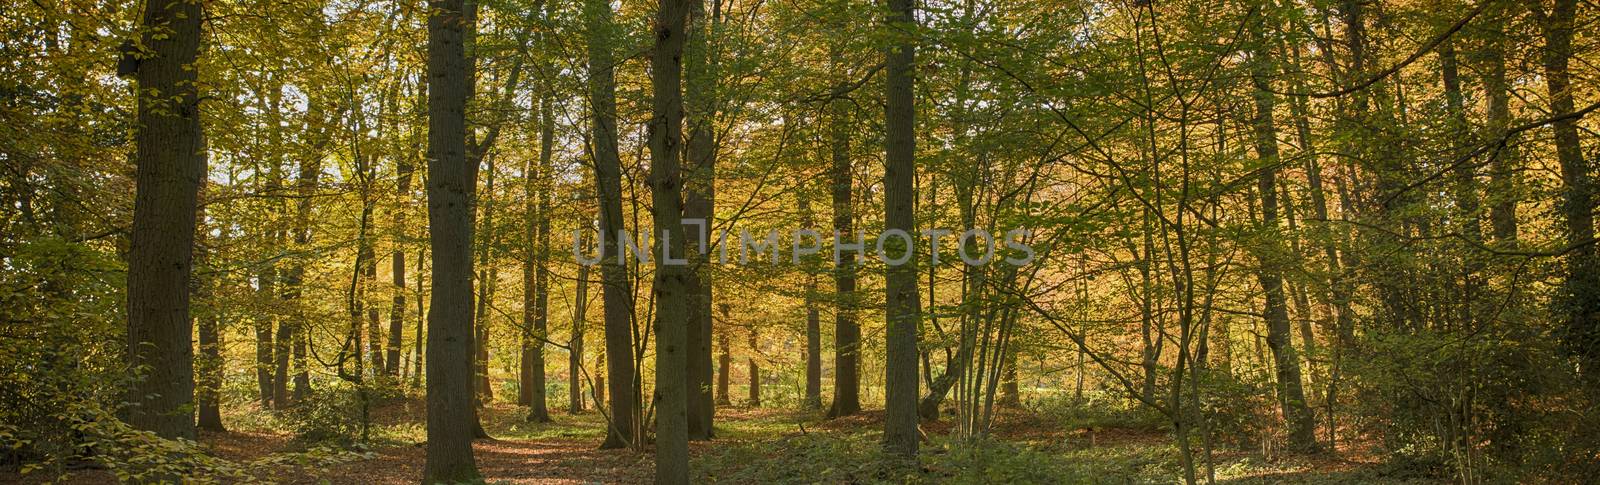 trees and leaves in the forest in autumn colors like gold red and orange